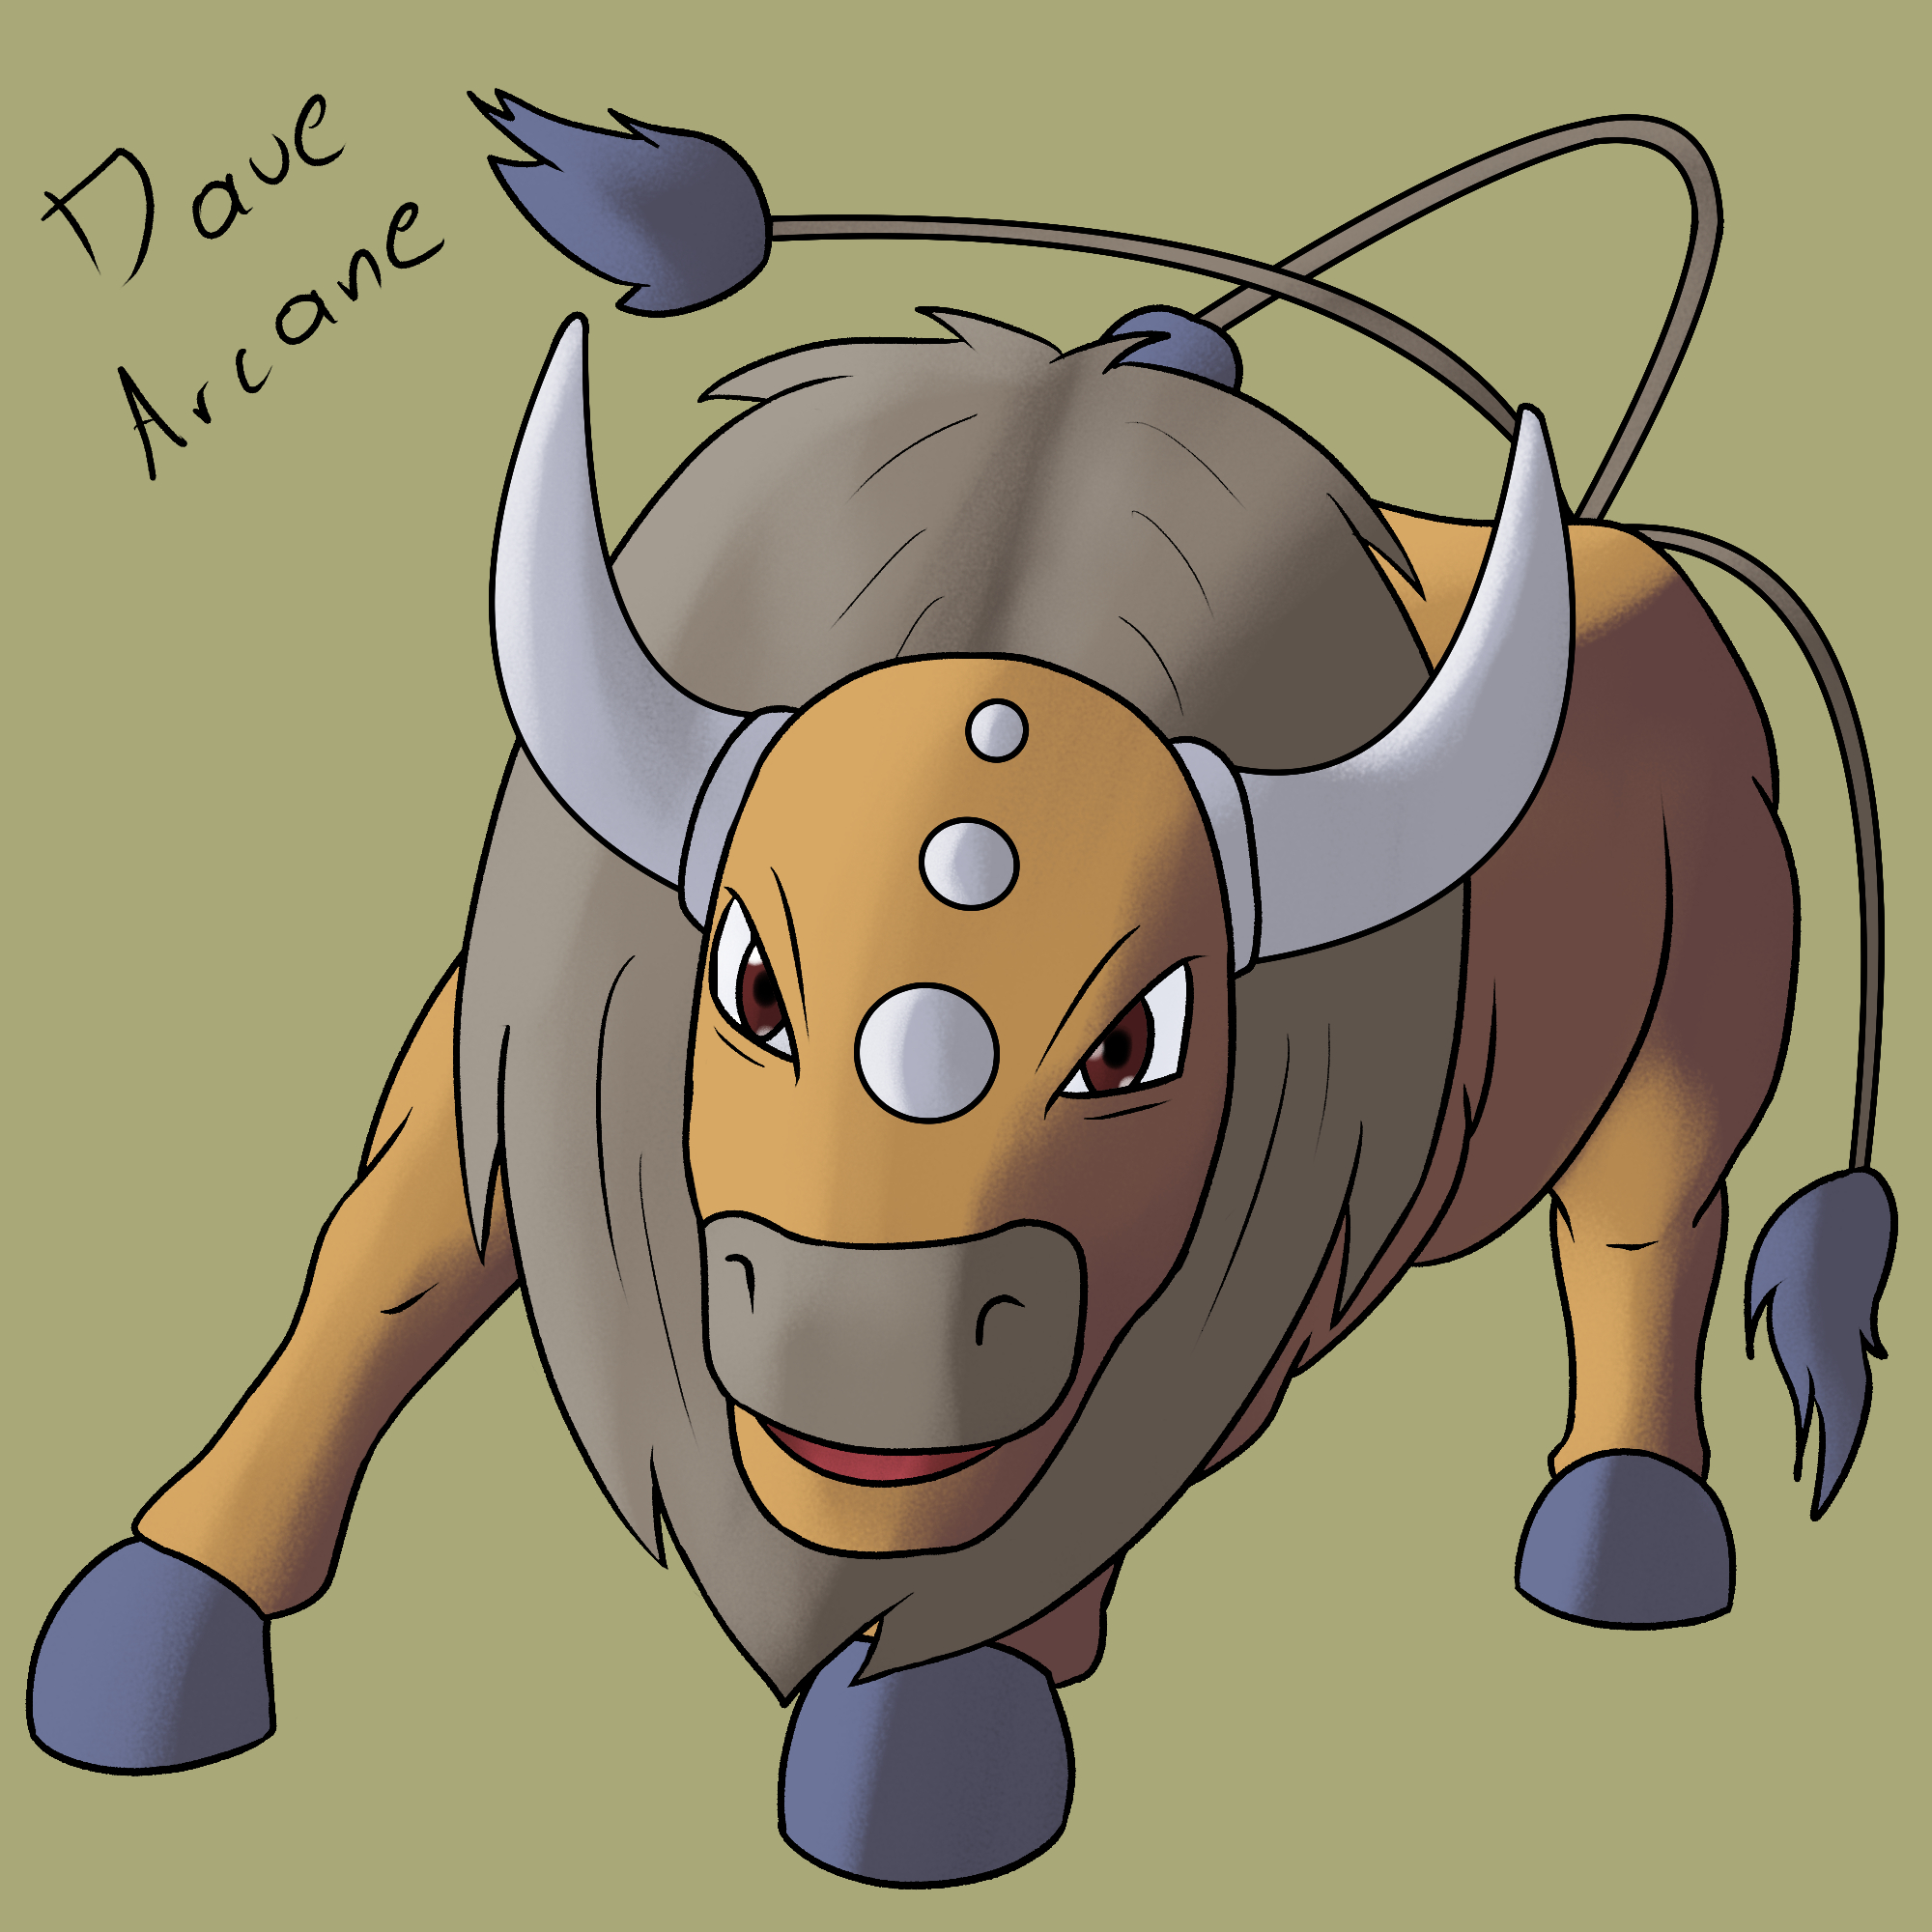 Dave Drawing 1 Pokemon Each Day Day 128 Of Drawing One Pokemon Per Day The Raging Bull Follow Me To See The Upcoming Pokemon Drawings Pokemon Pokemonart Drawing Tauros Pokemondrawing